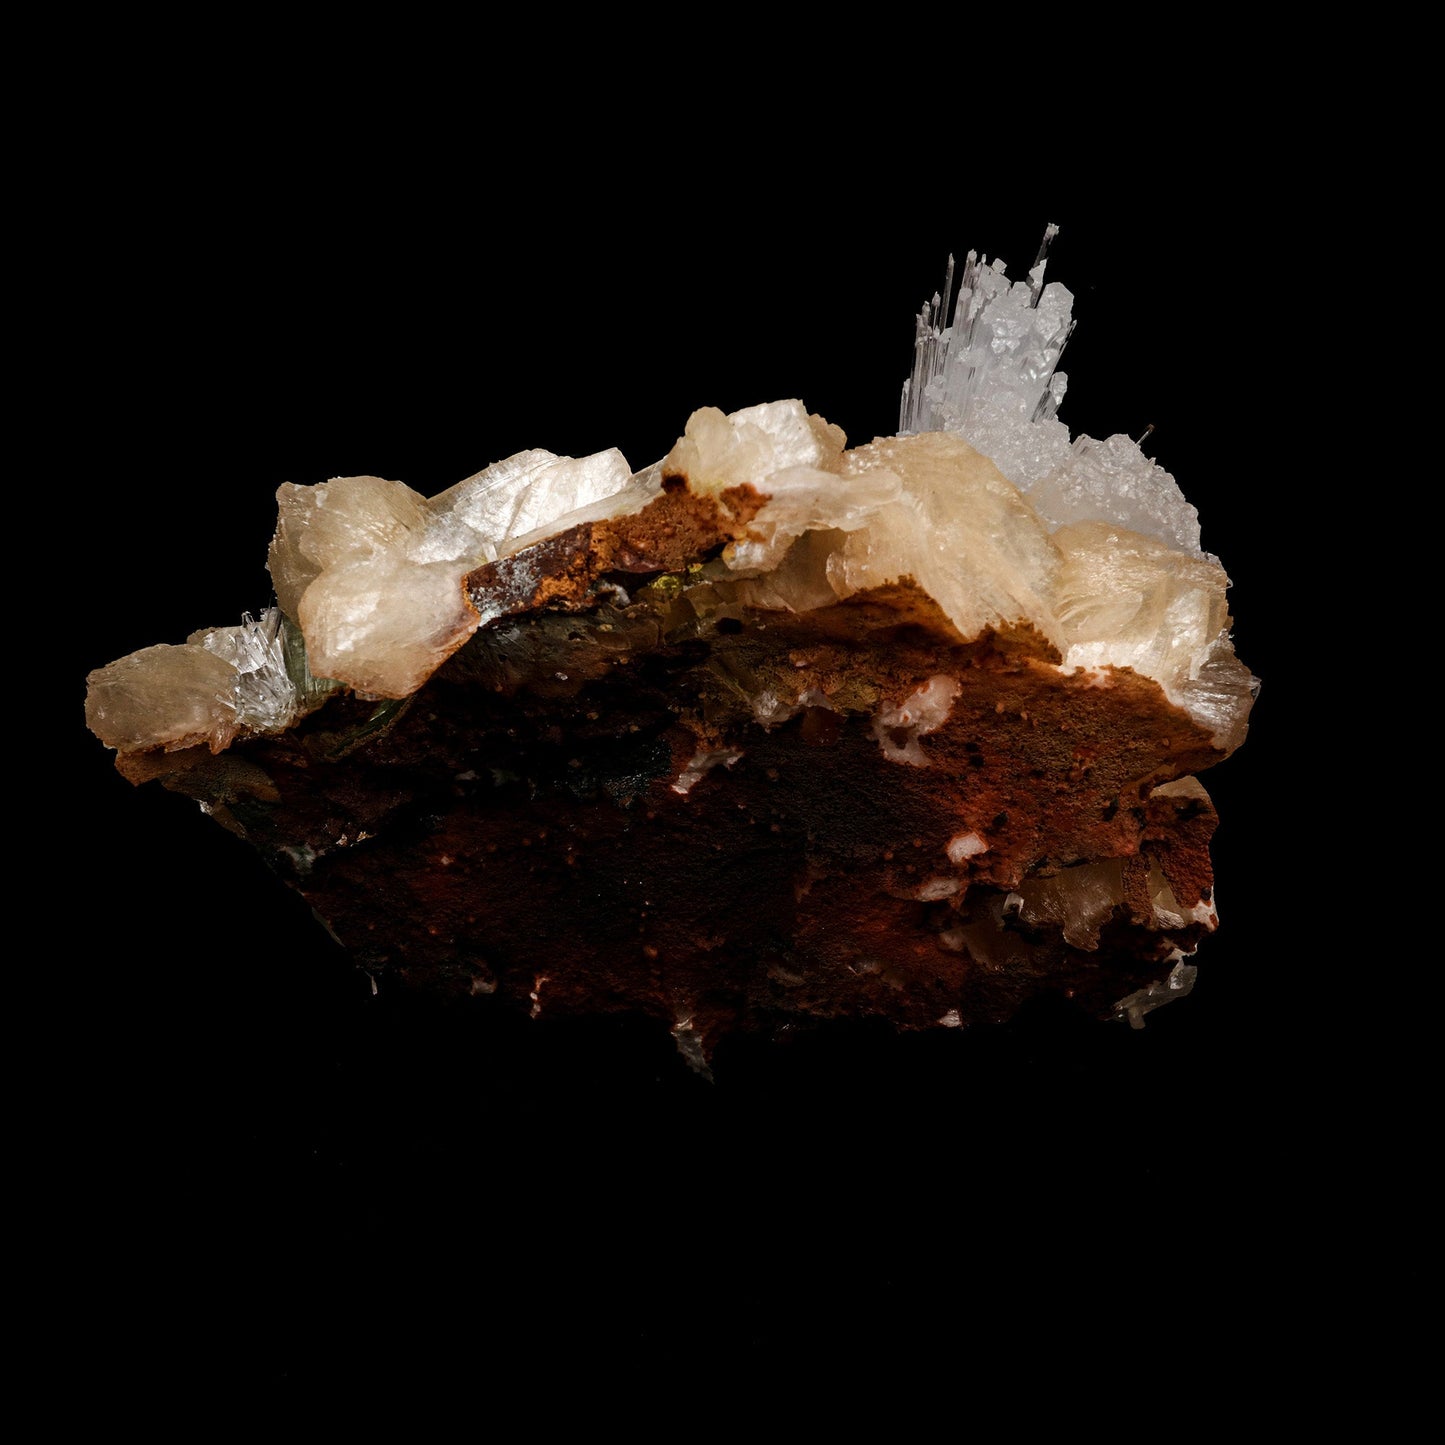 Scolecite Sprays with Green Apophyllite on Stilbite Natural Mineral Sp…  https://www.superbminerals.us/products/scolecite-sprays-with-green-apophyllite-on-stilbite-natural-mineral-specimen-b-5250  Features: A group of thin scolecite crystals with an elongated prism and transparence in the terminal crystal area. They form radial aggregates penetrating apophyllite crystals and disposed randomly. There are tetragonal prisms and a few pyramidal faces on the top and base, along with great luster 